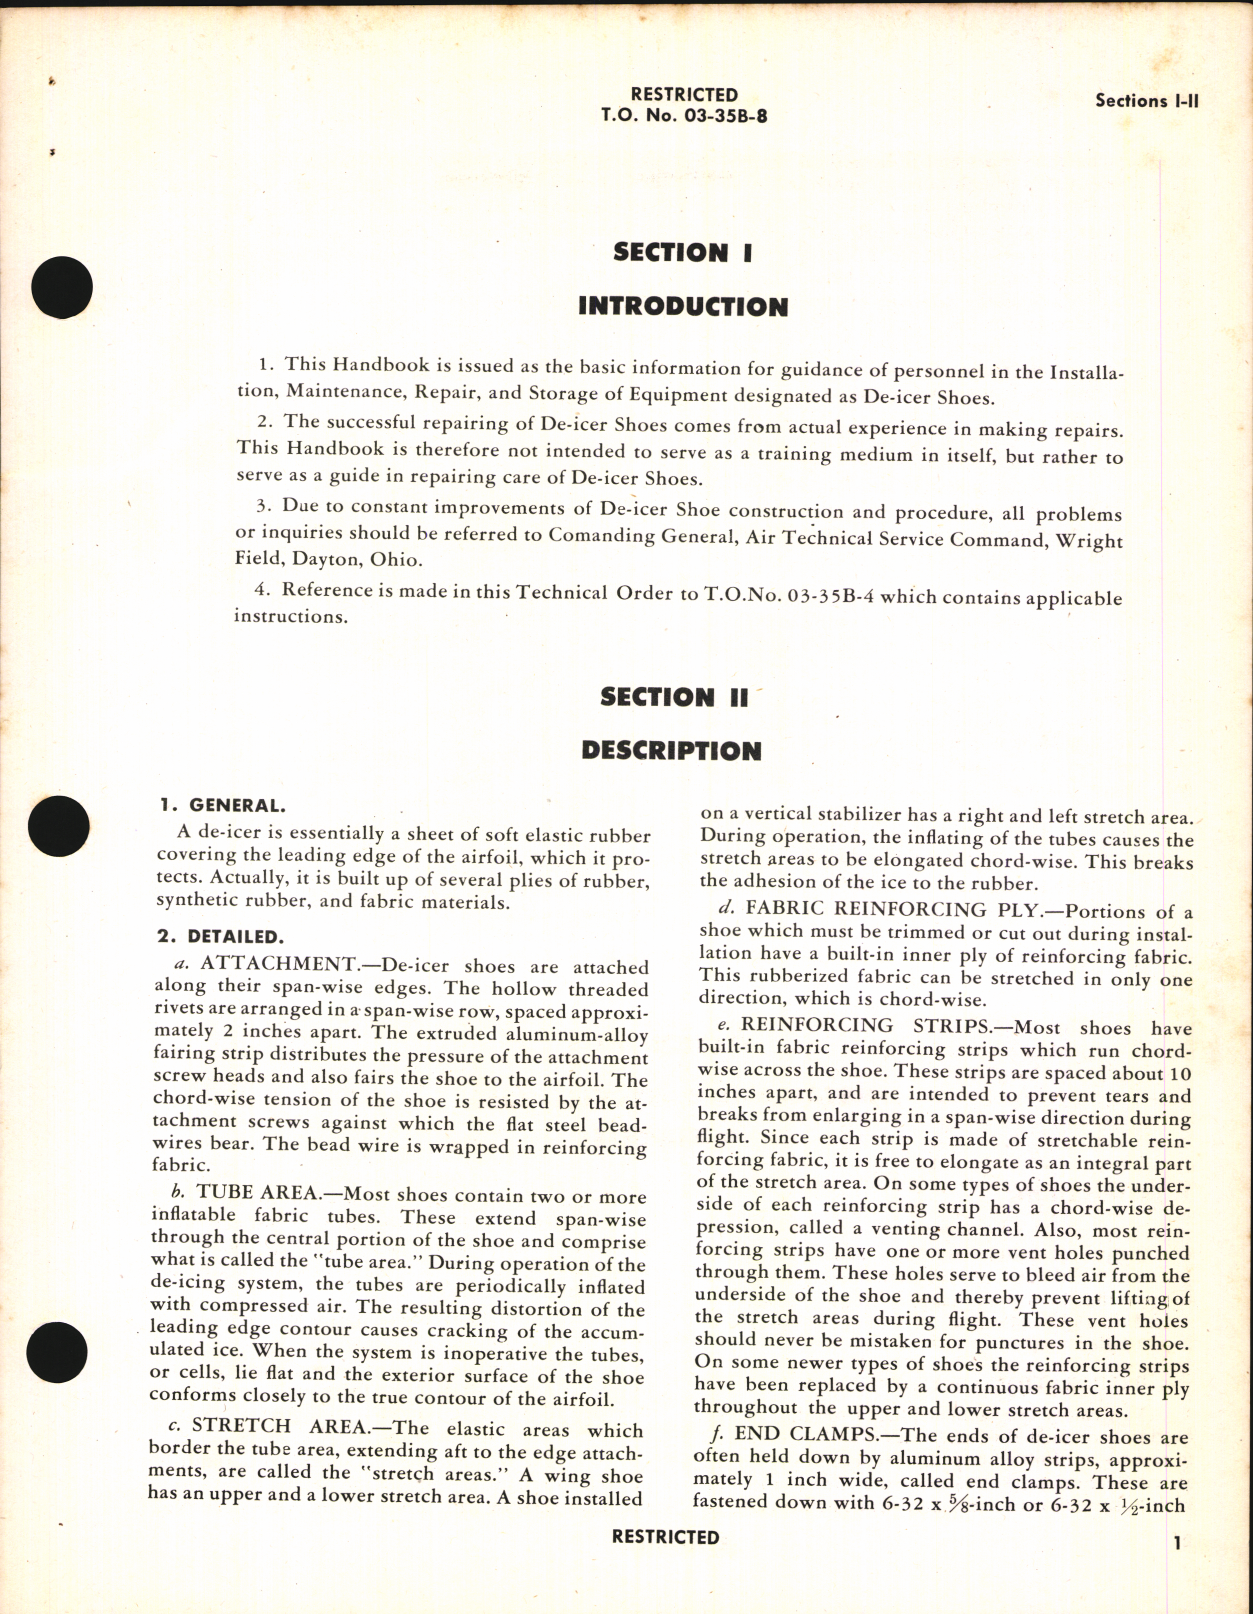 Sample page 5 from AirCorps Library document: Handbook of Instructions for Installation, Repair, and Storage of De-Icer Shoes